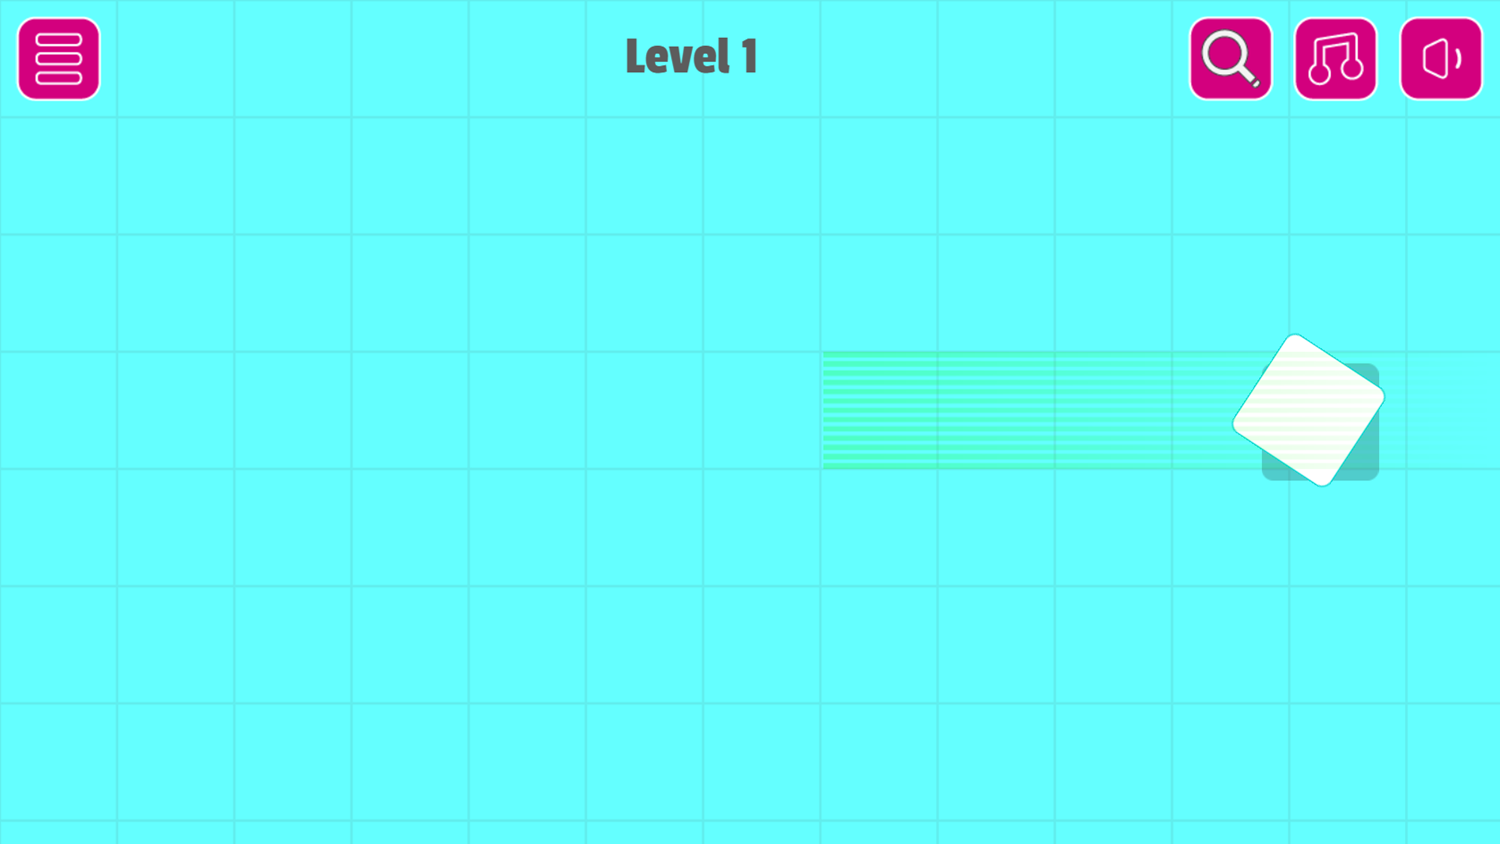 Remove Puzzle Game Level Play Screenshot.